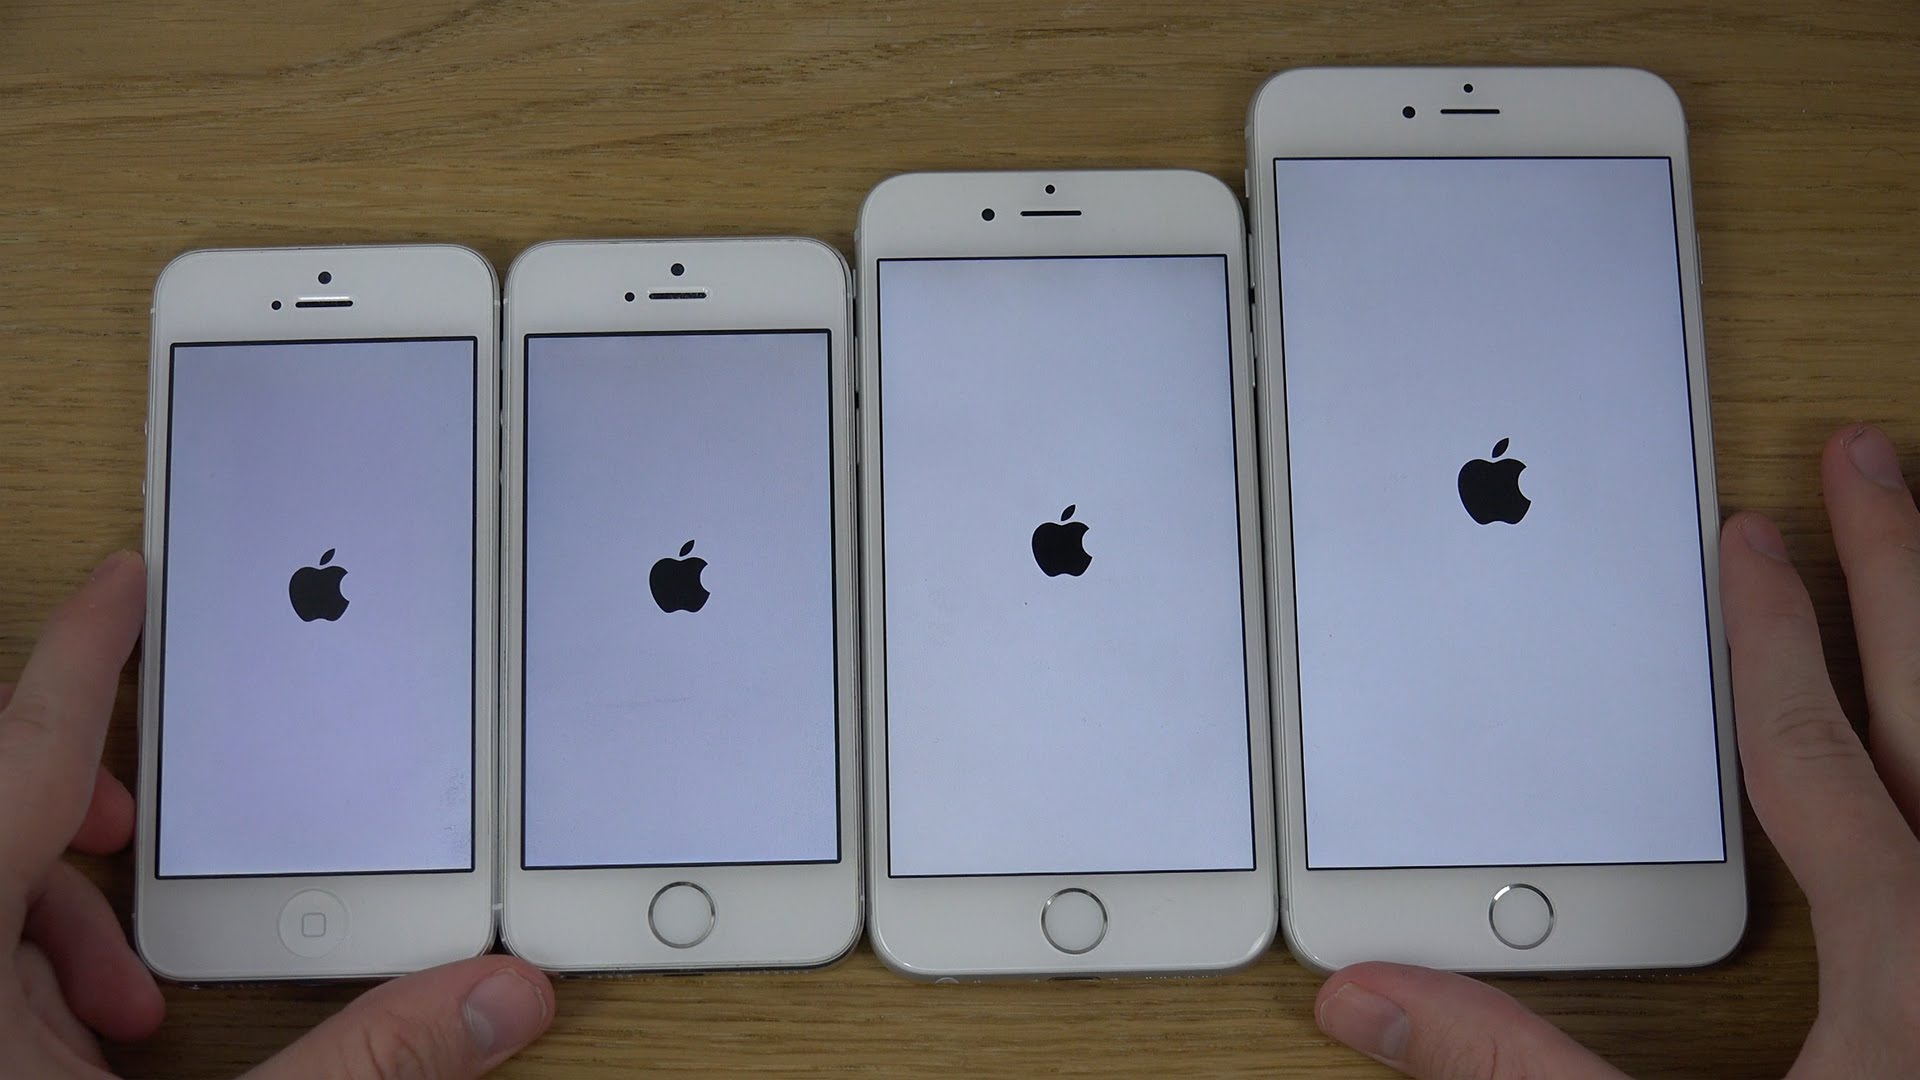 Iphone 6 Plus Vs Iphone 6 Vs Iphone 5s Vs Iphone 5 Which Is Faster 4k